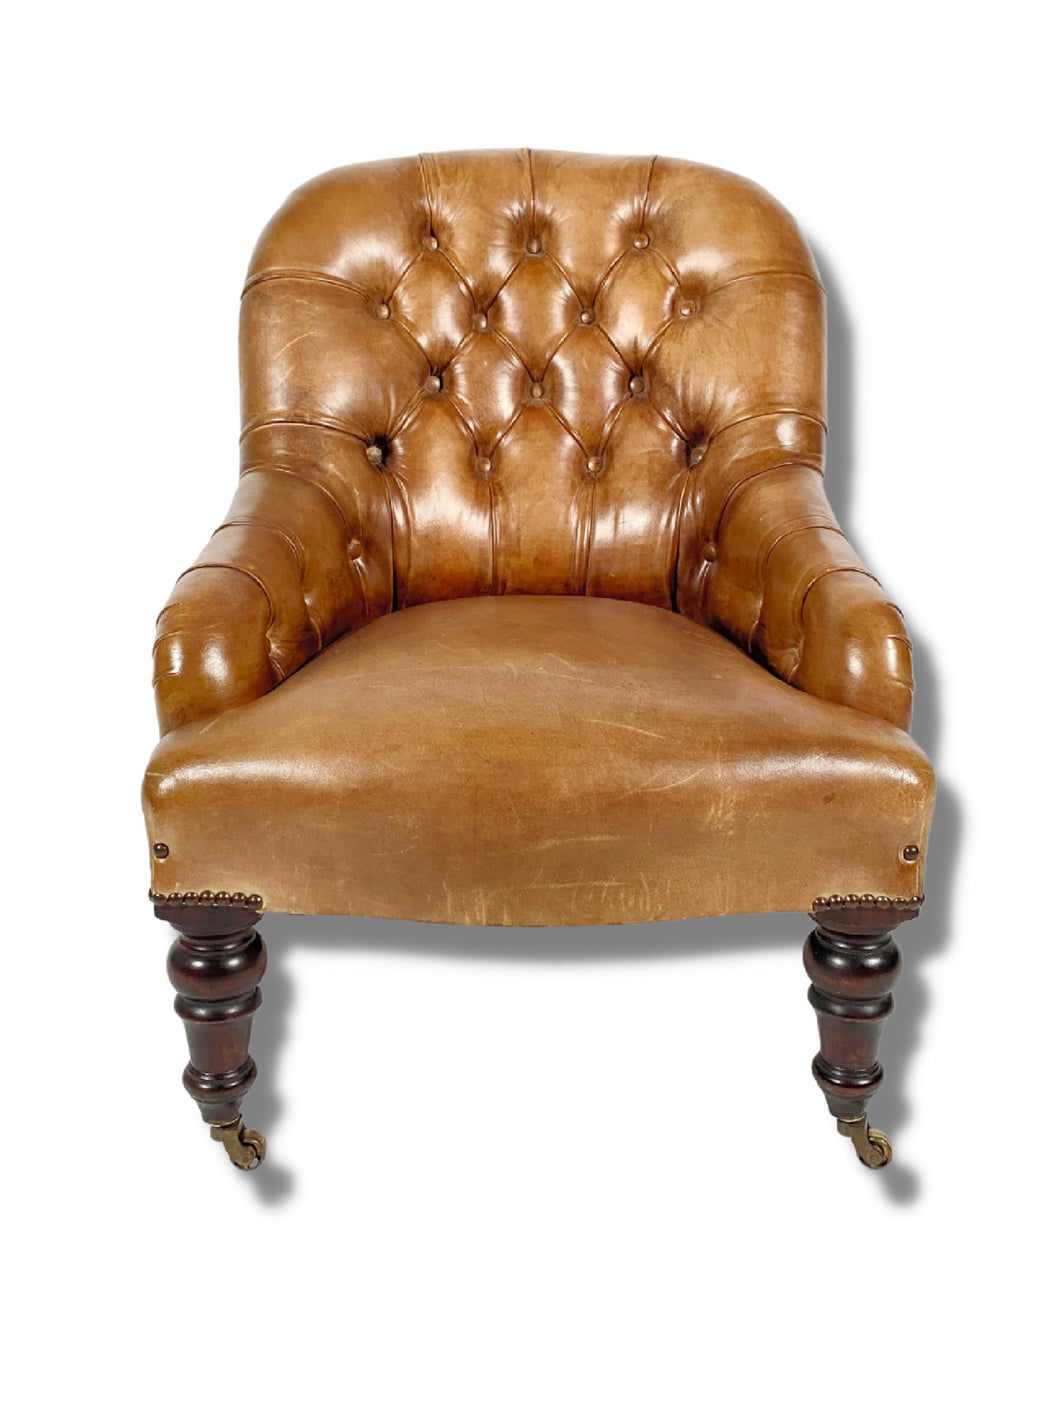 Leather Chesterfield Slipper Chair